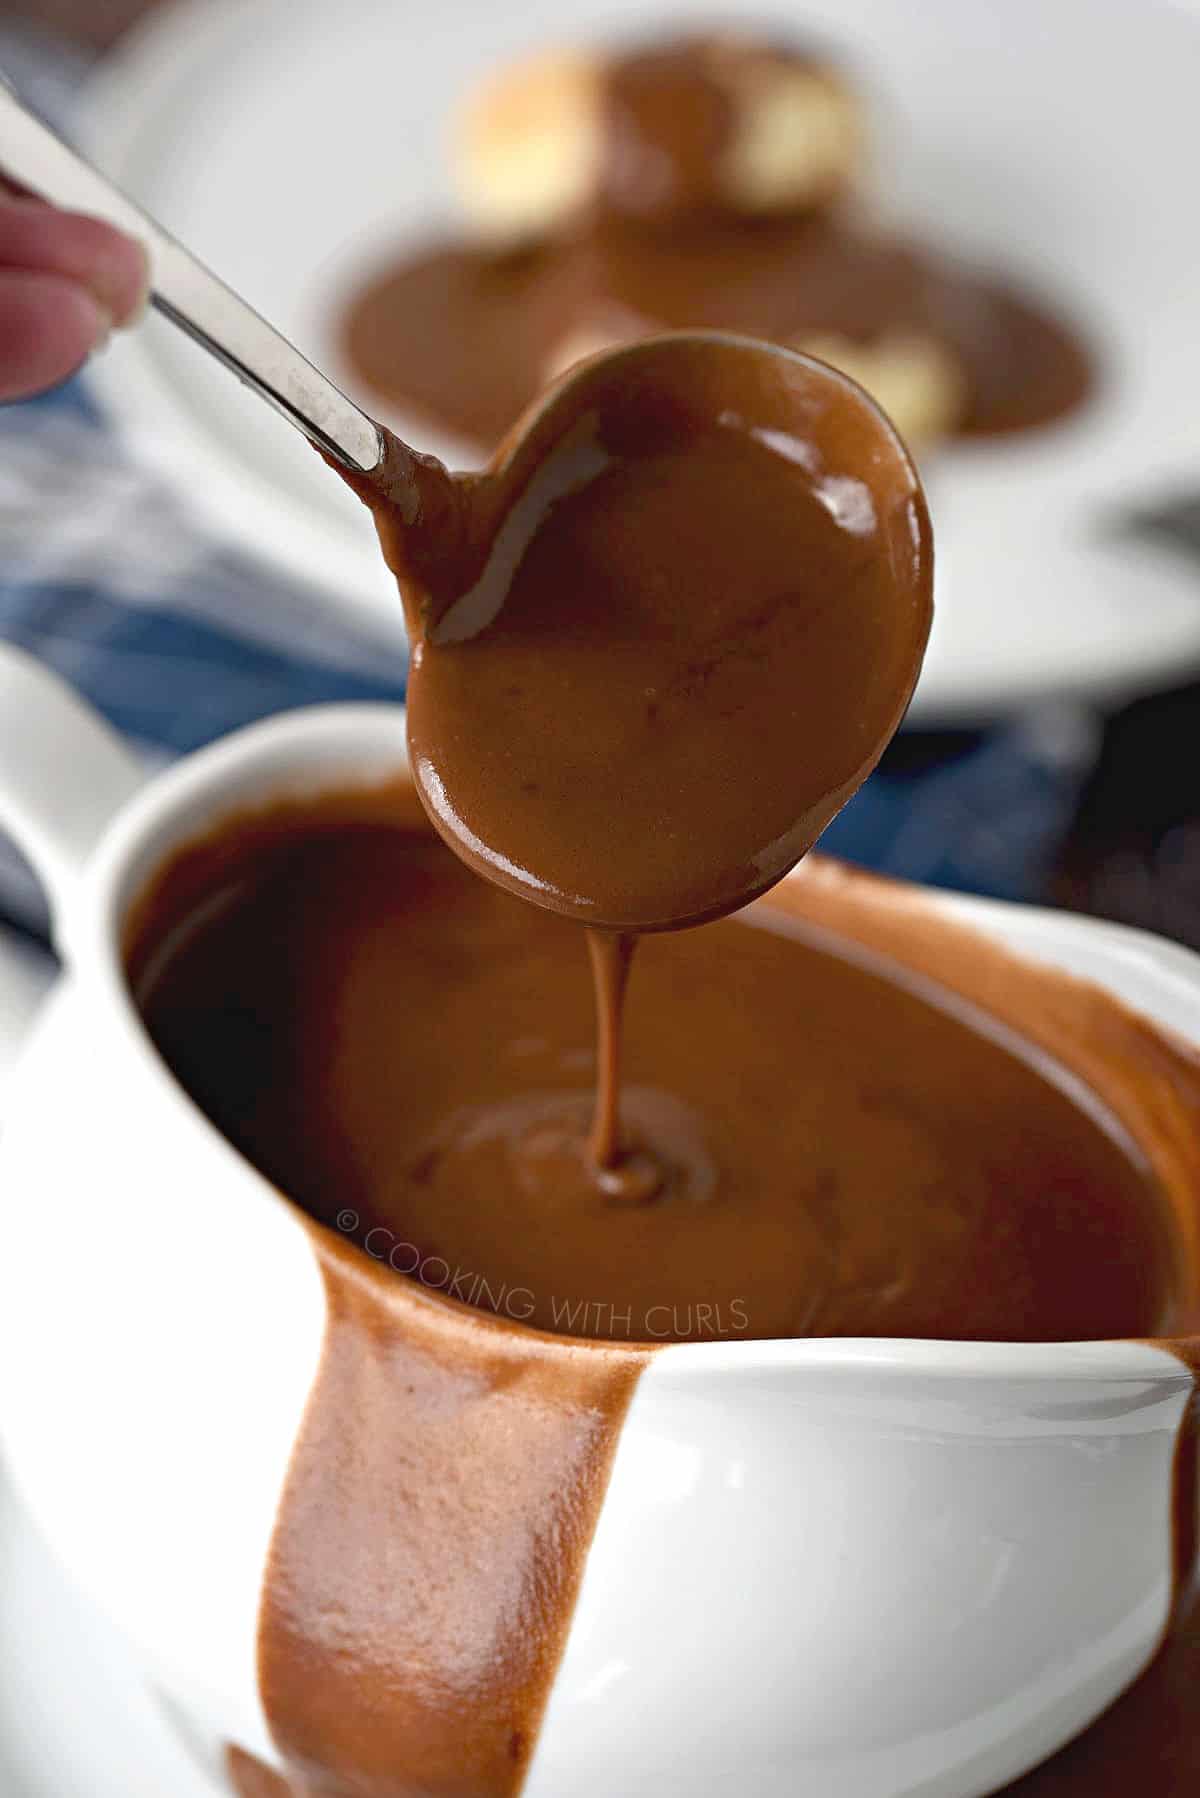 Thick, chocolate gravy dripping off the edge of a ladle into an overflowing gravy boat.